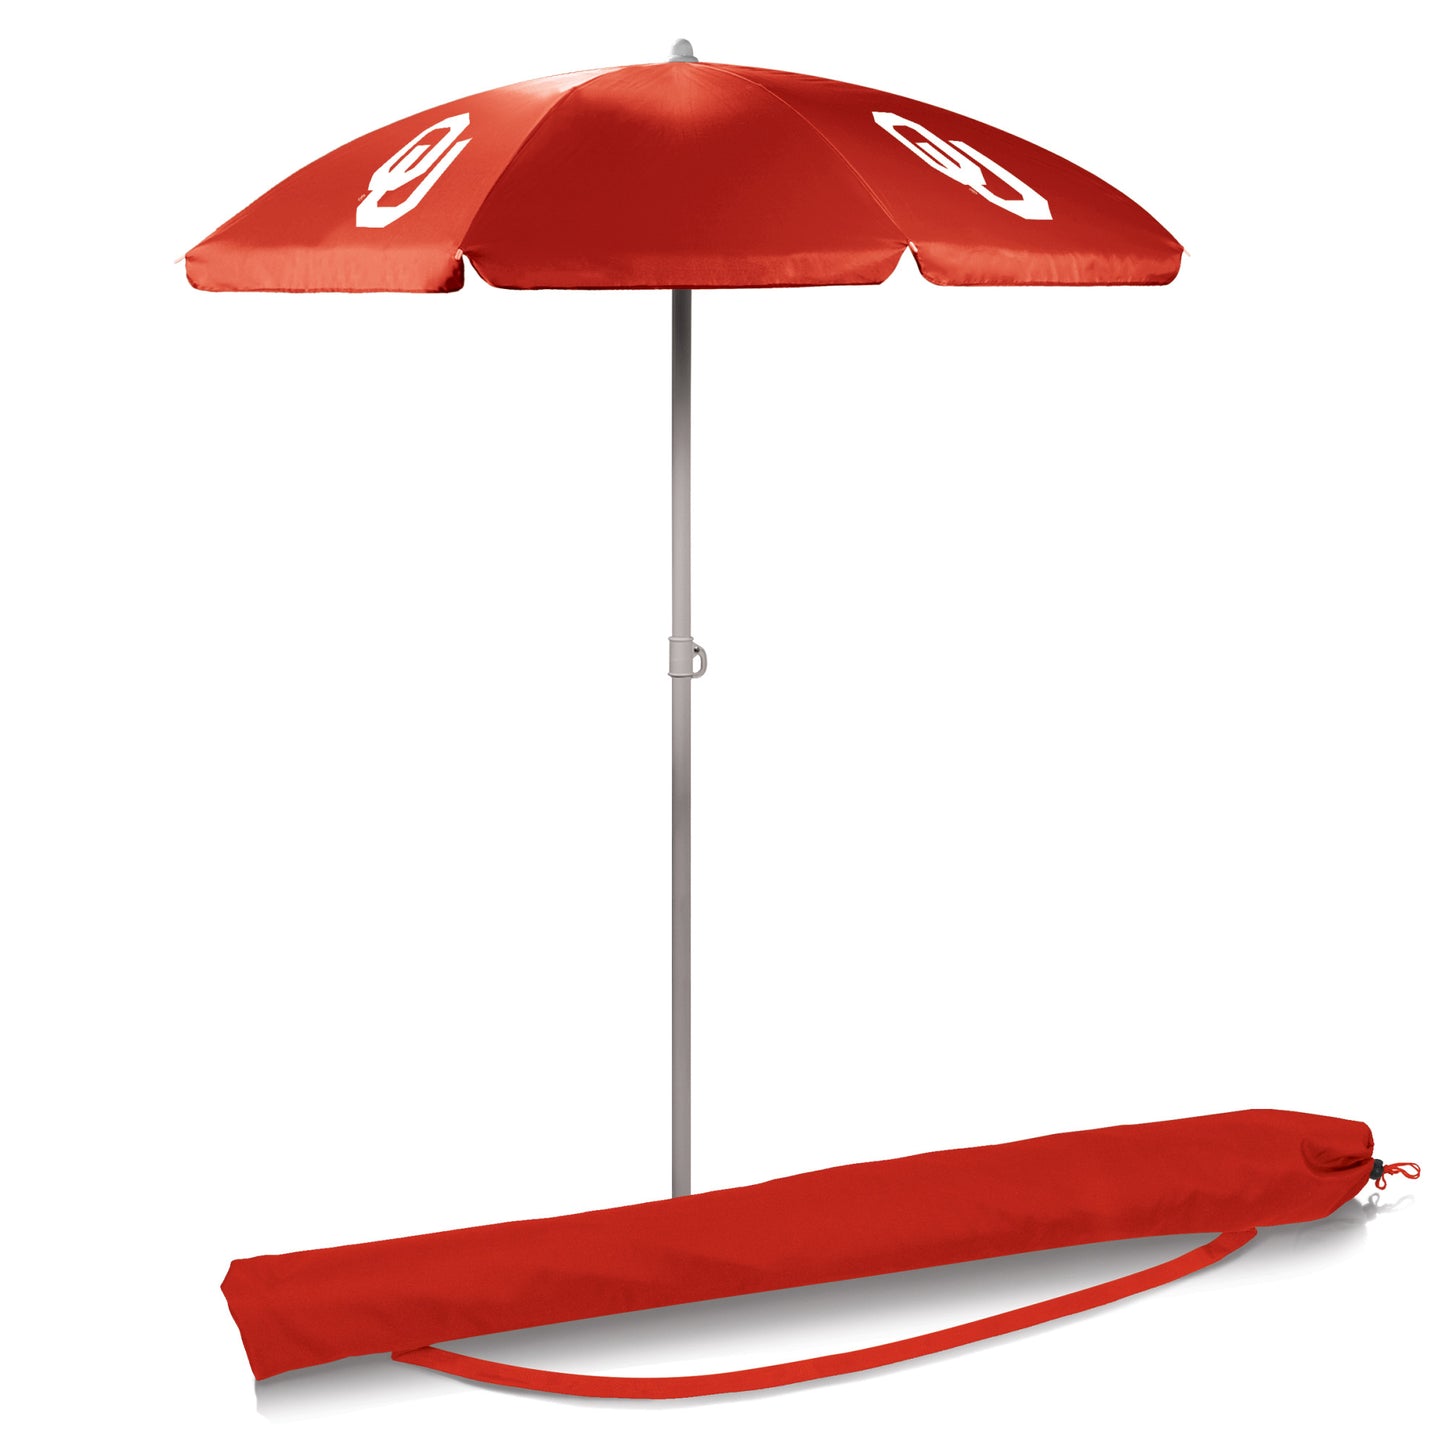 Oklahoma Sooners 5.5' Portable Red Beach Umbrella by Picnic Time